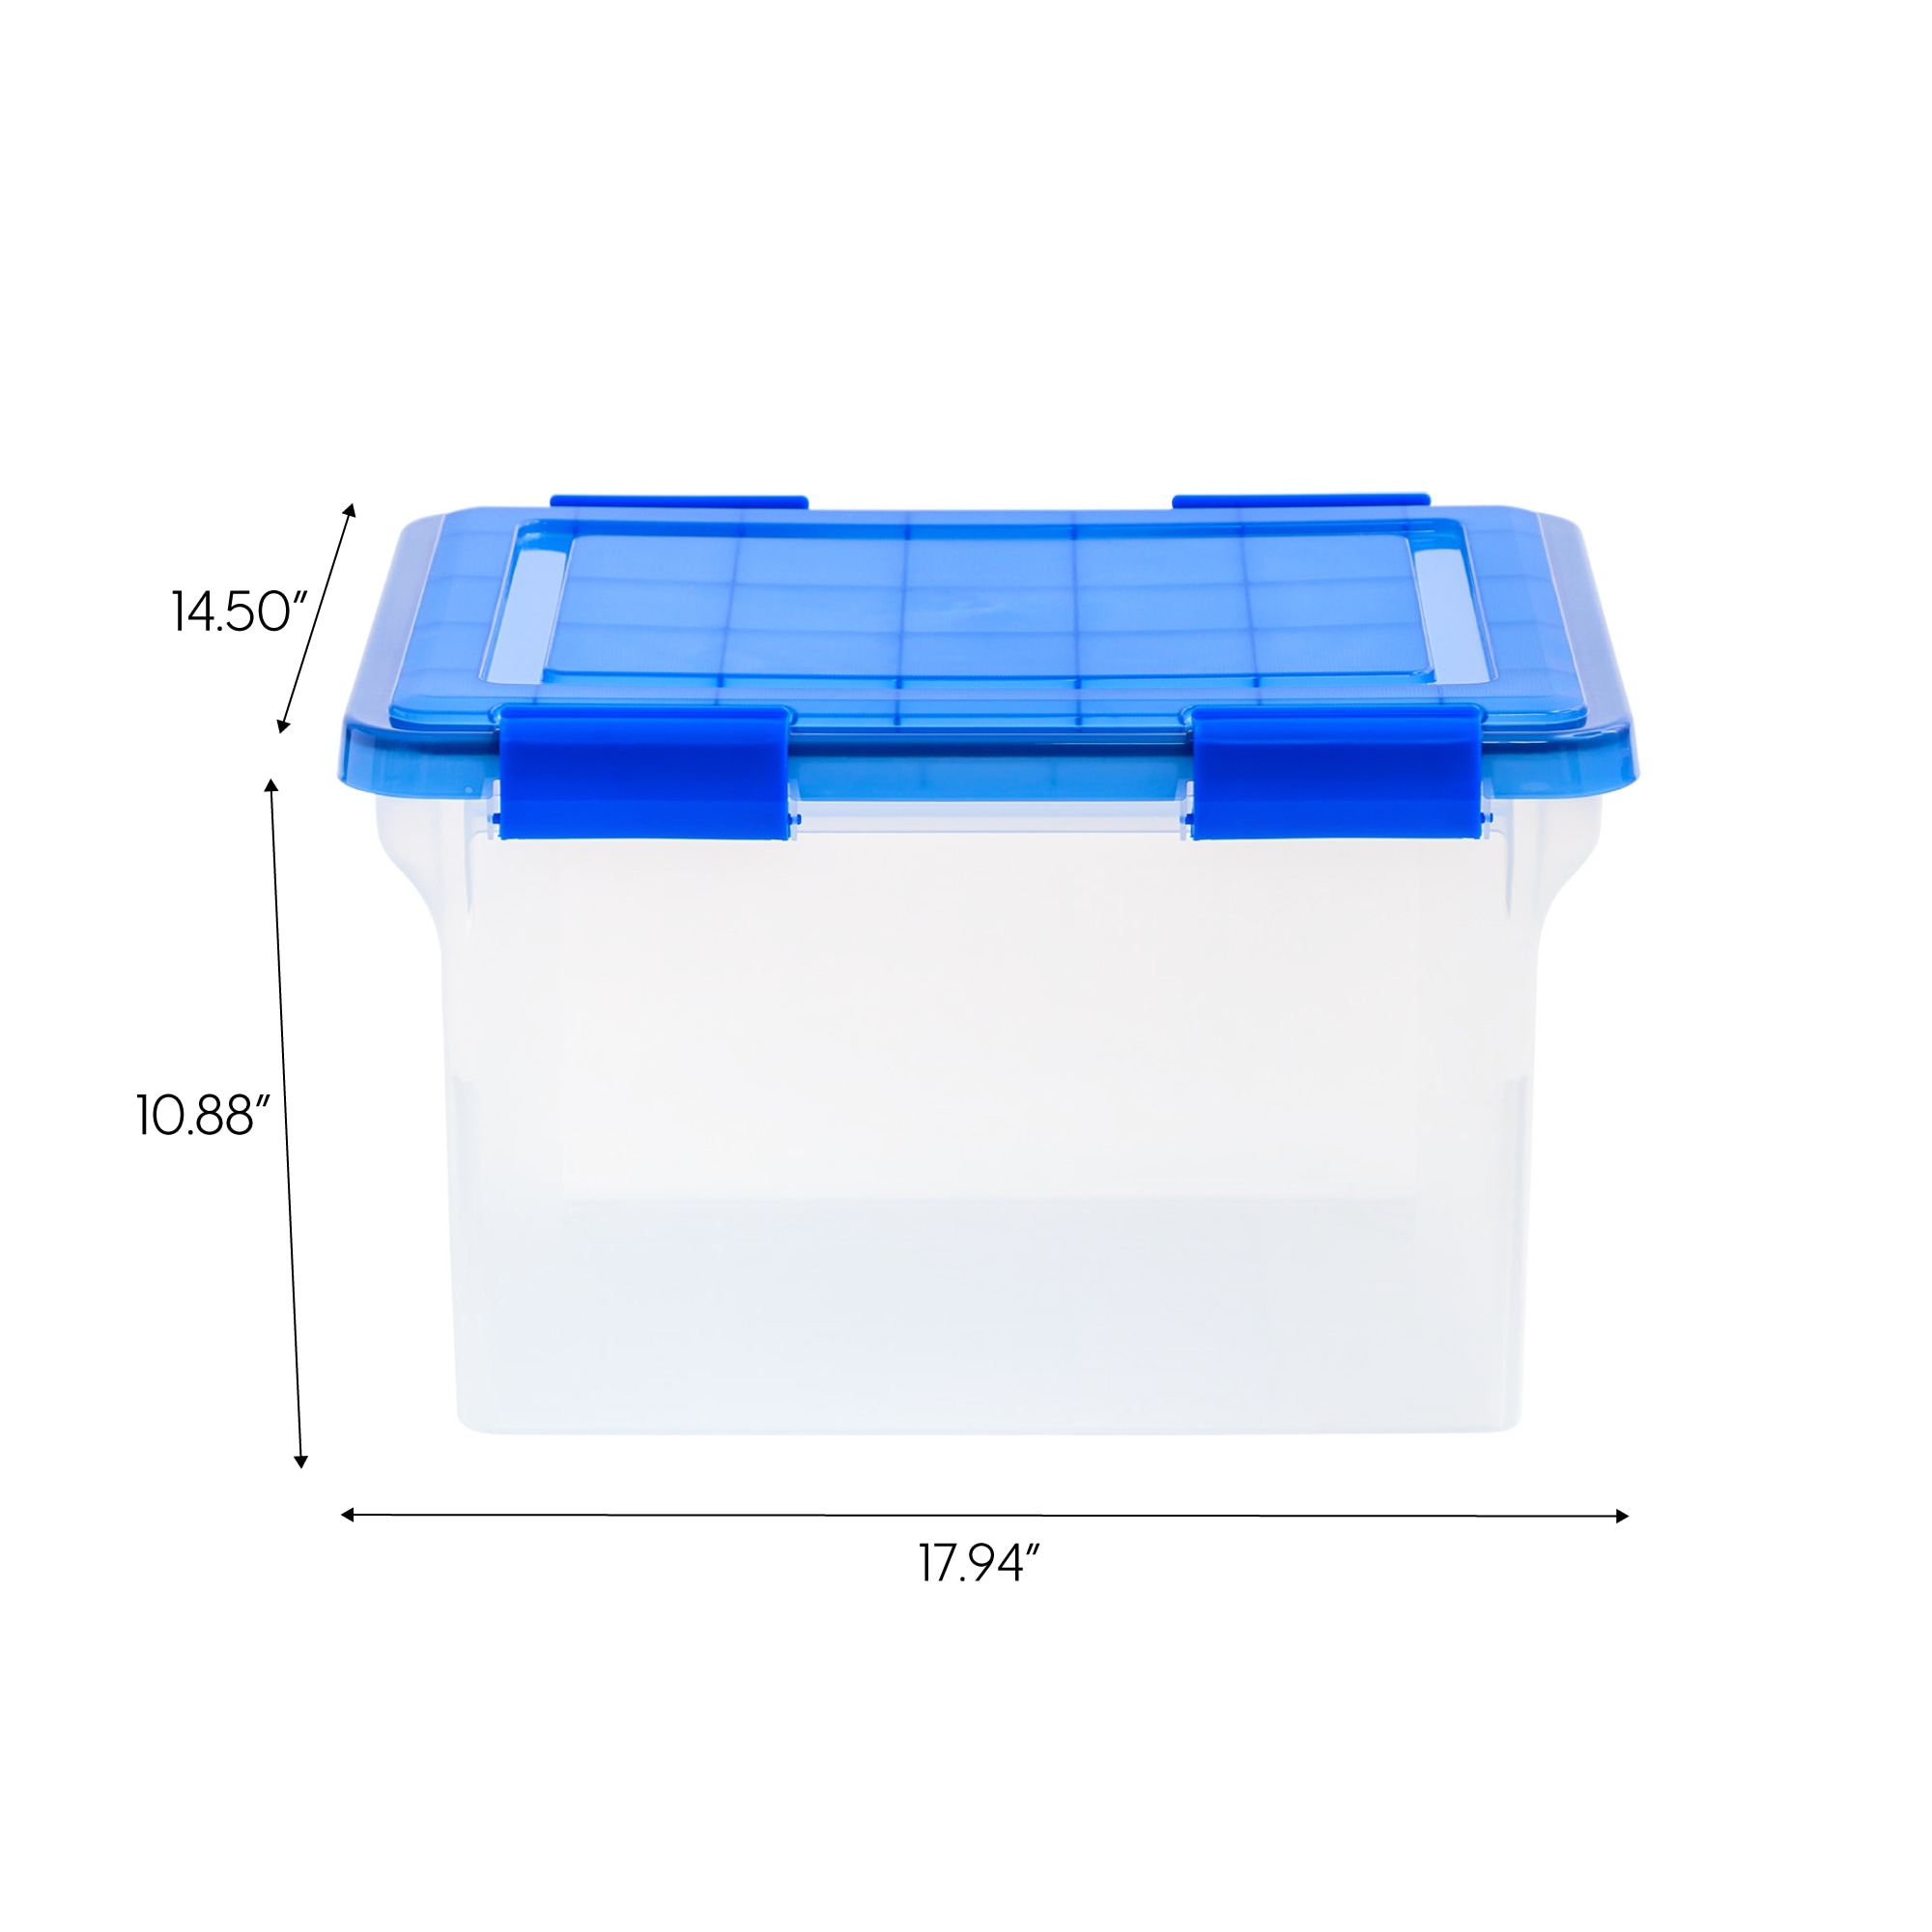 Pack of 2 - 133 Litre Extra Large Long Plastic Storage Boxes with Lids